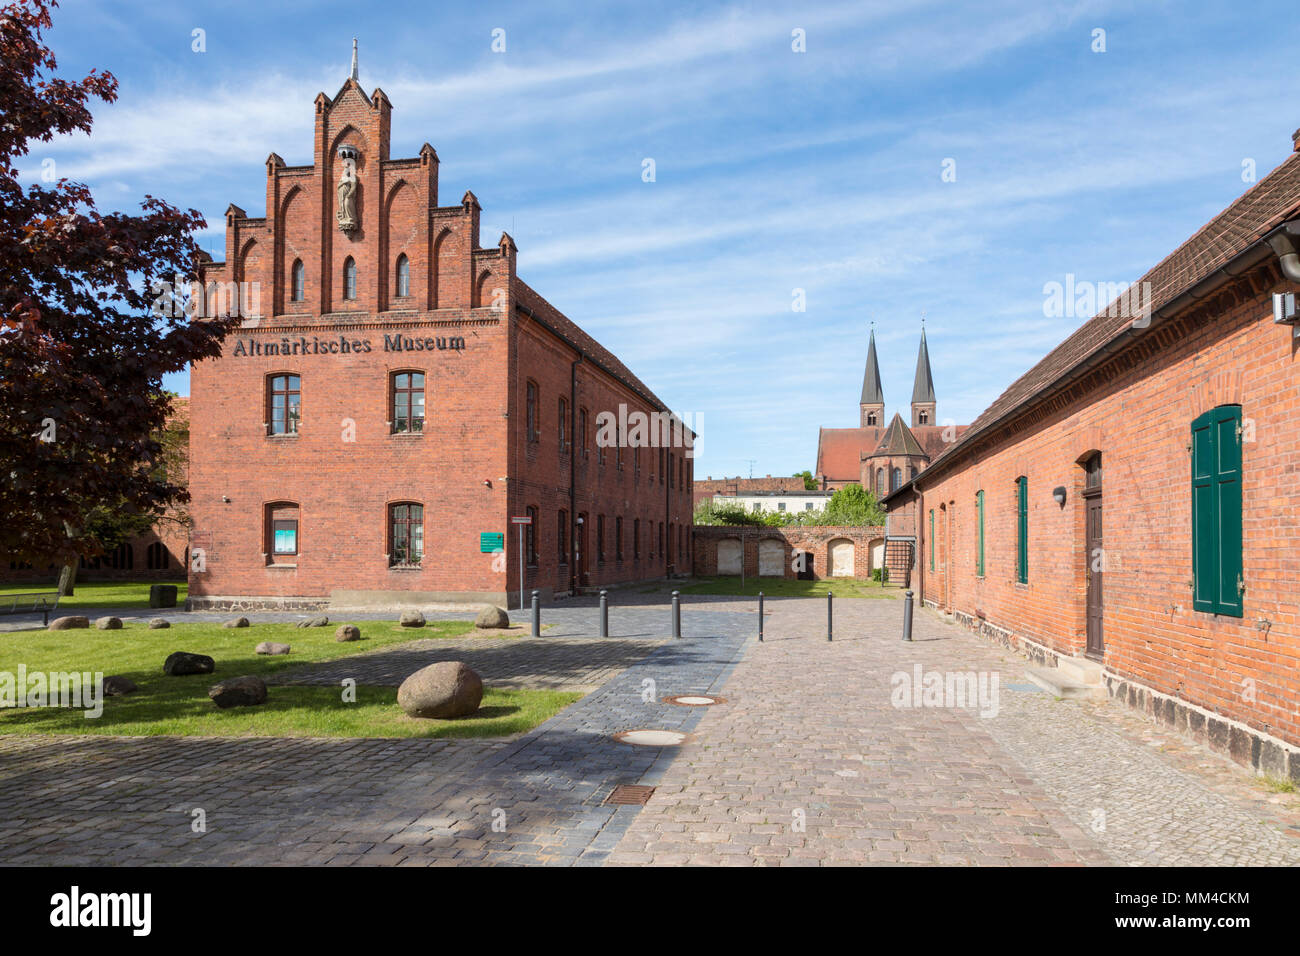 Museum of the Altmark at Stendal, St Nicholas cathedral in background Stock Photo